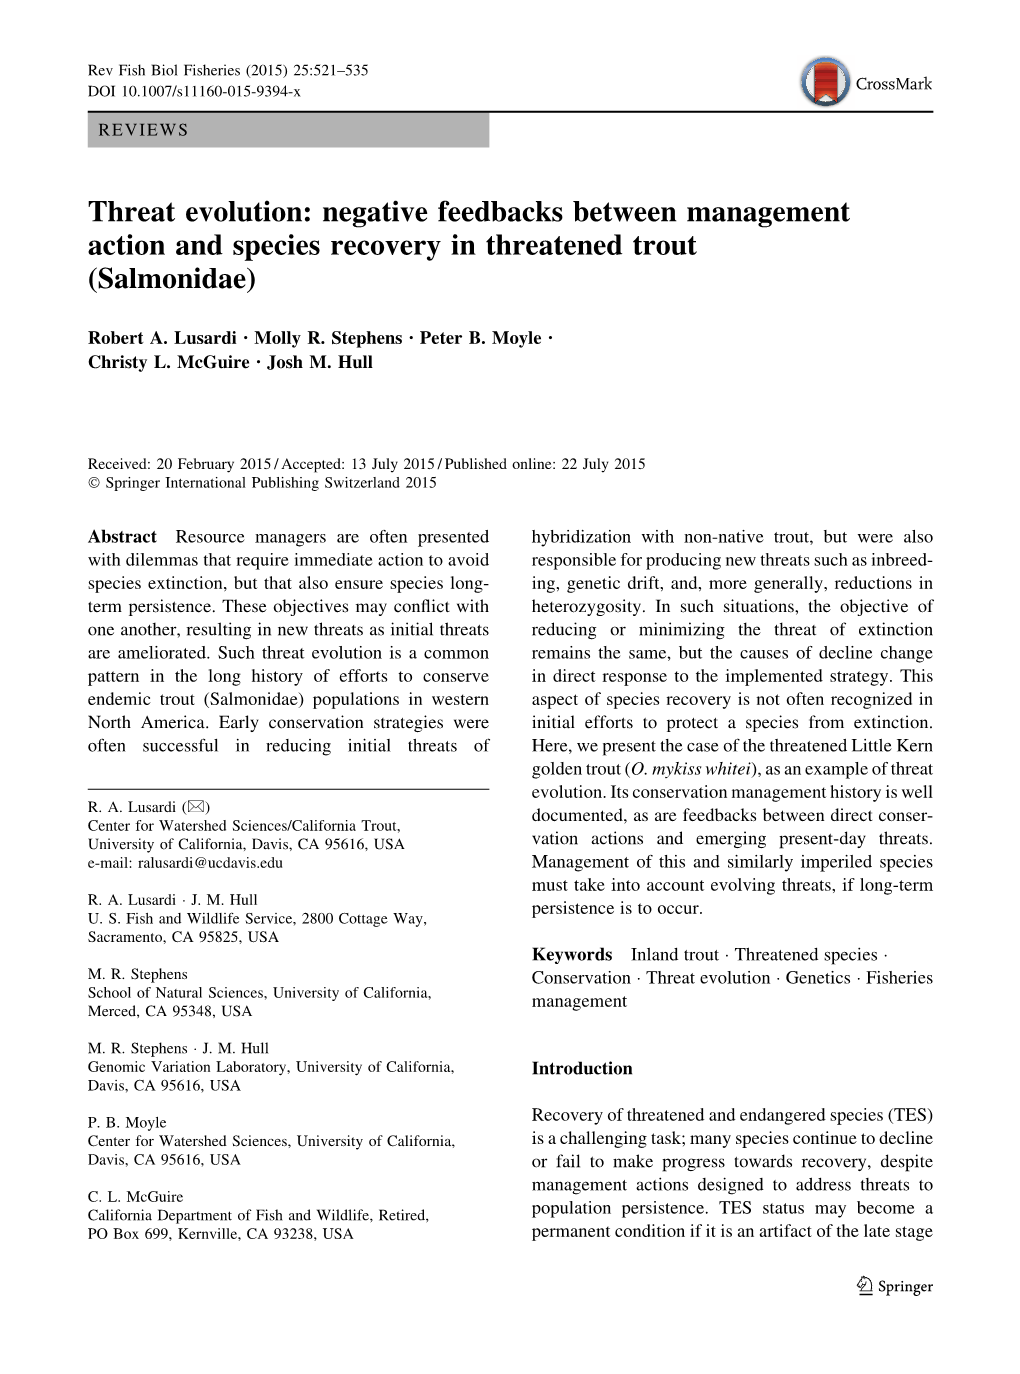 Negative Feedbacks Between Management Action and Species Recovery in Threatened Trout (Salmonidae)